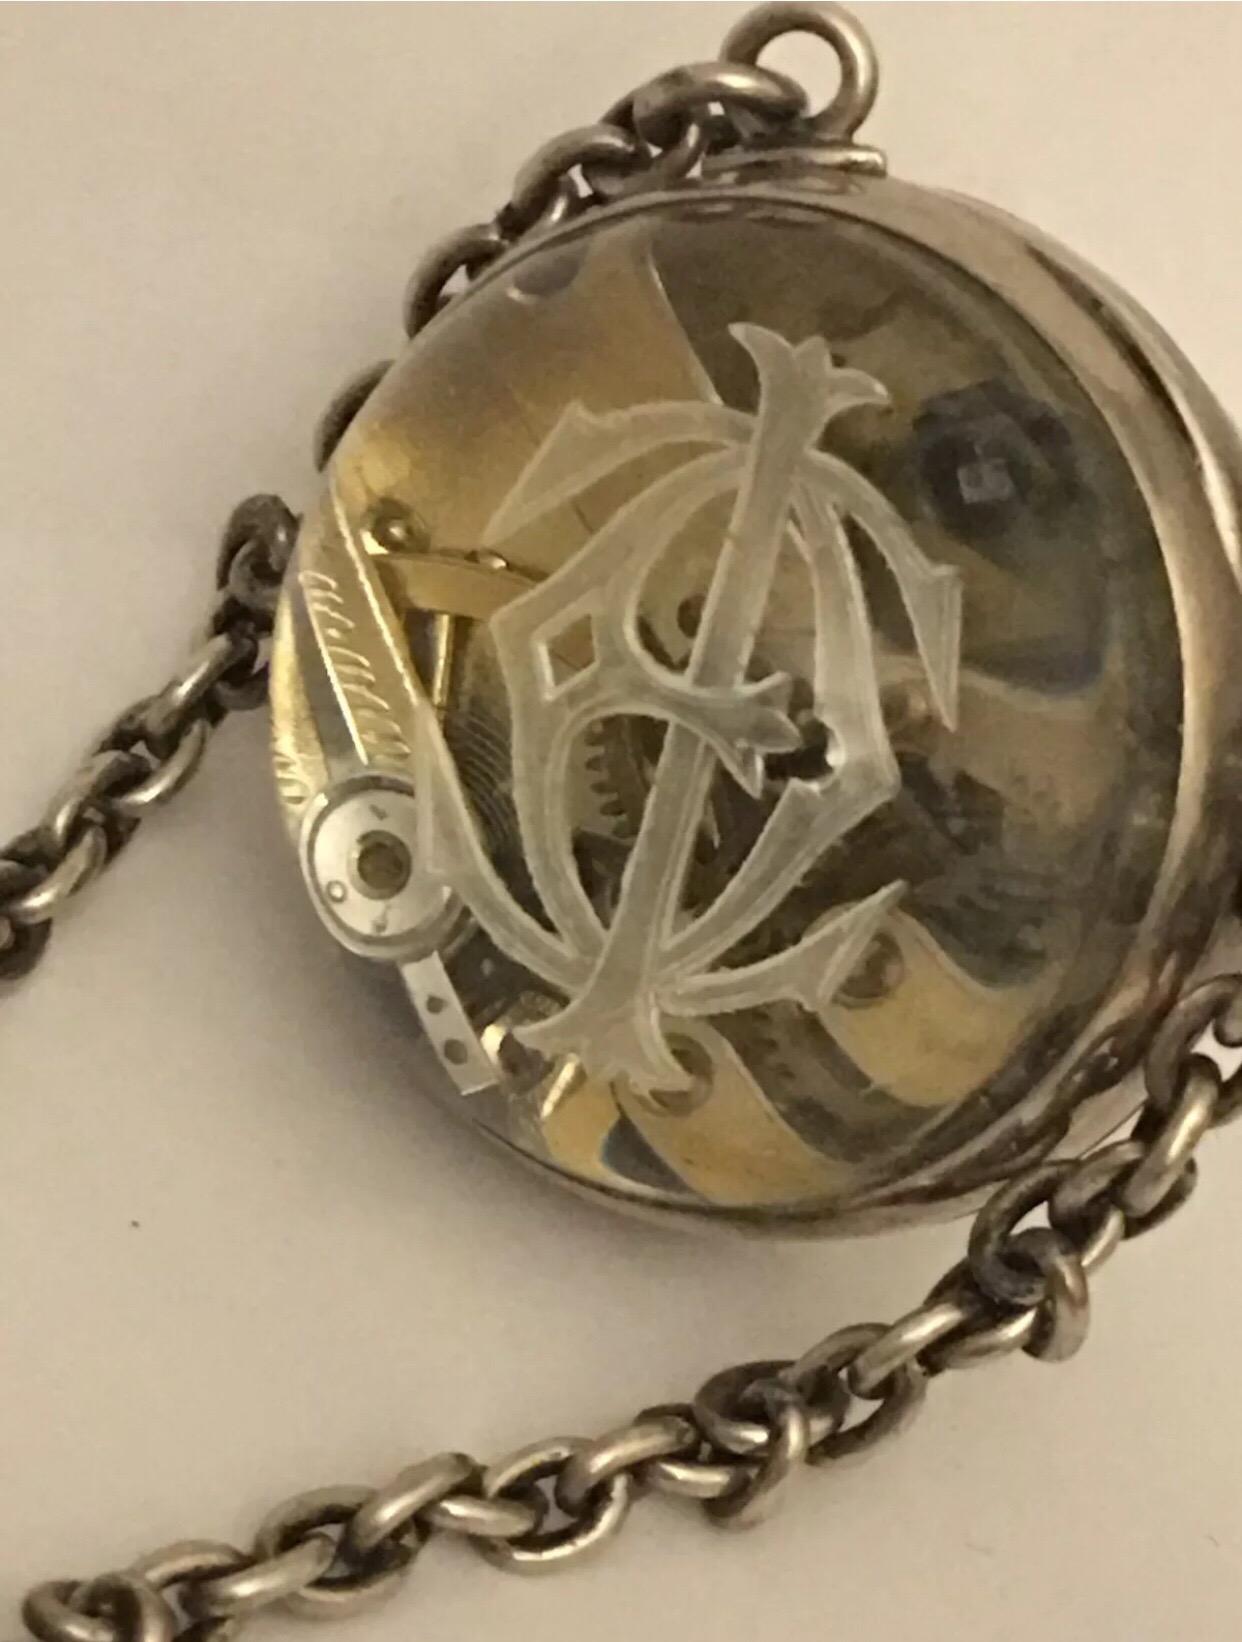 
Rare Antique Silver glass ball pocket watch with matching Silver Glass chatelaine.


This beautiful piece is in good working condition and it is ticking well. Visible signs of ageing and wear. The watch is measured 32mm diameter. Please study the